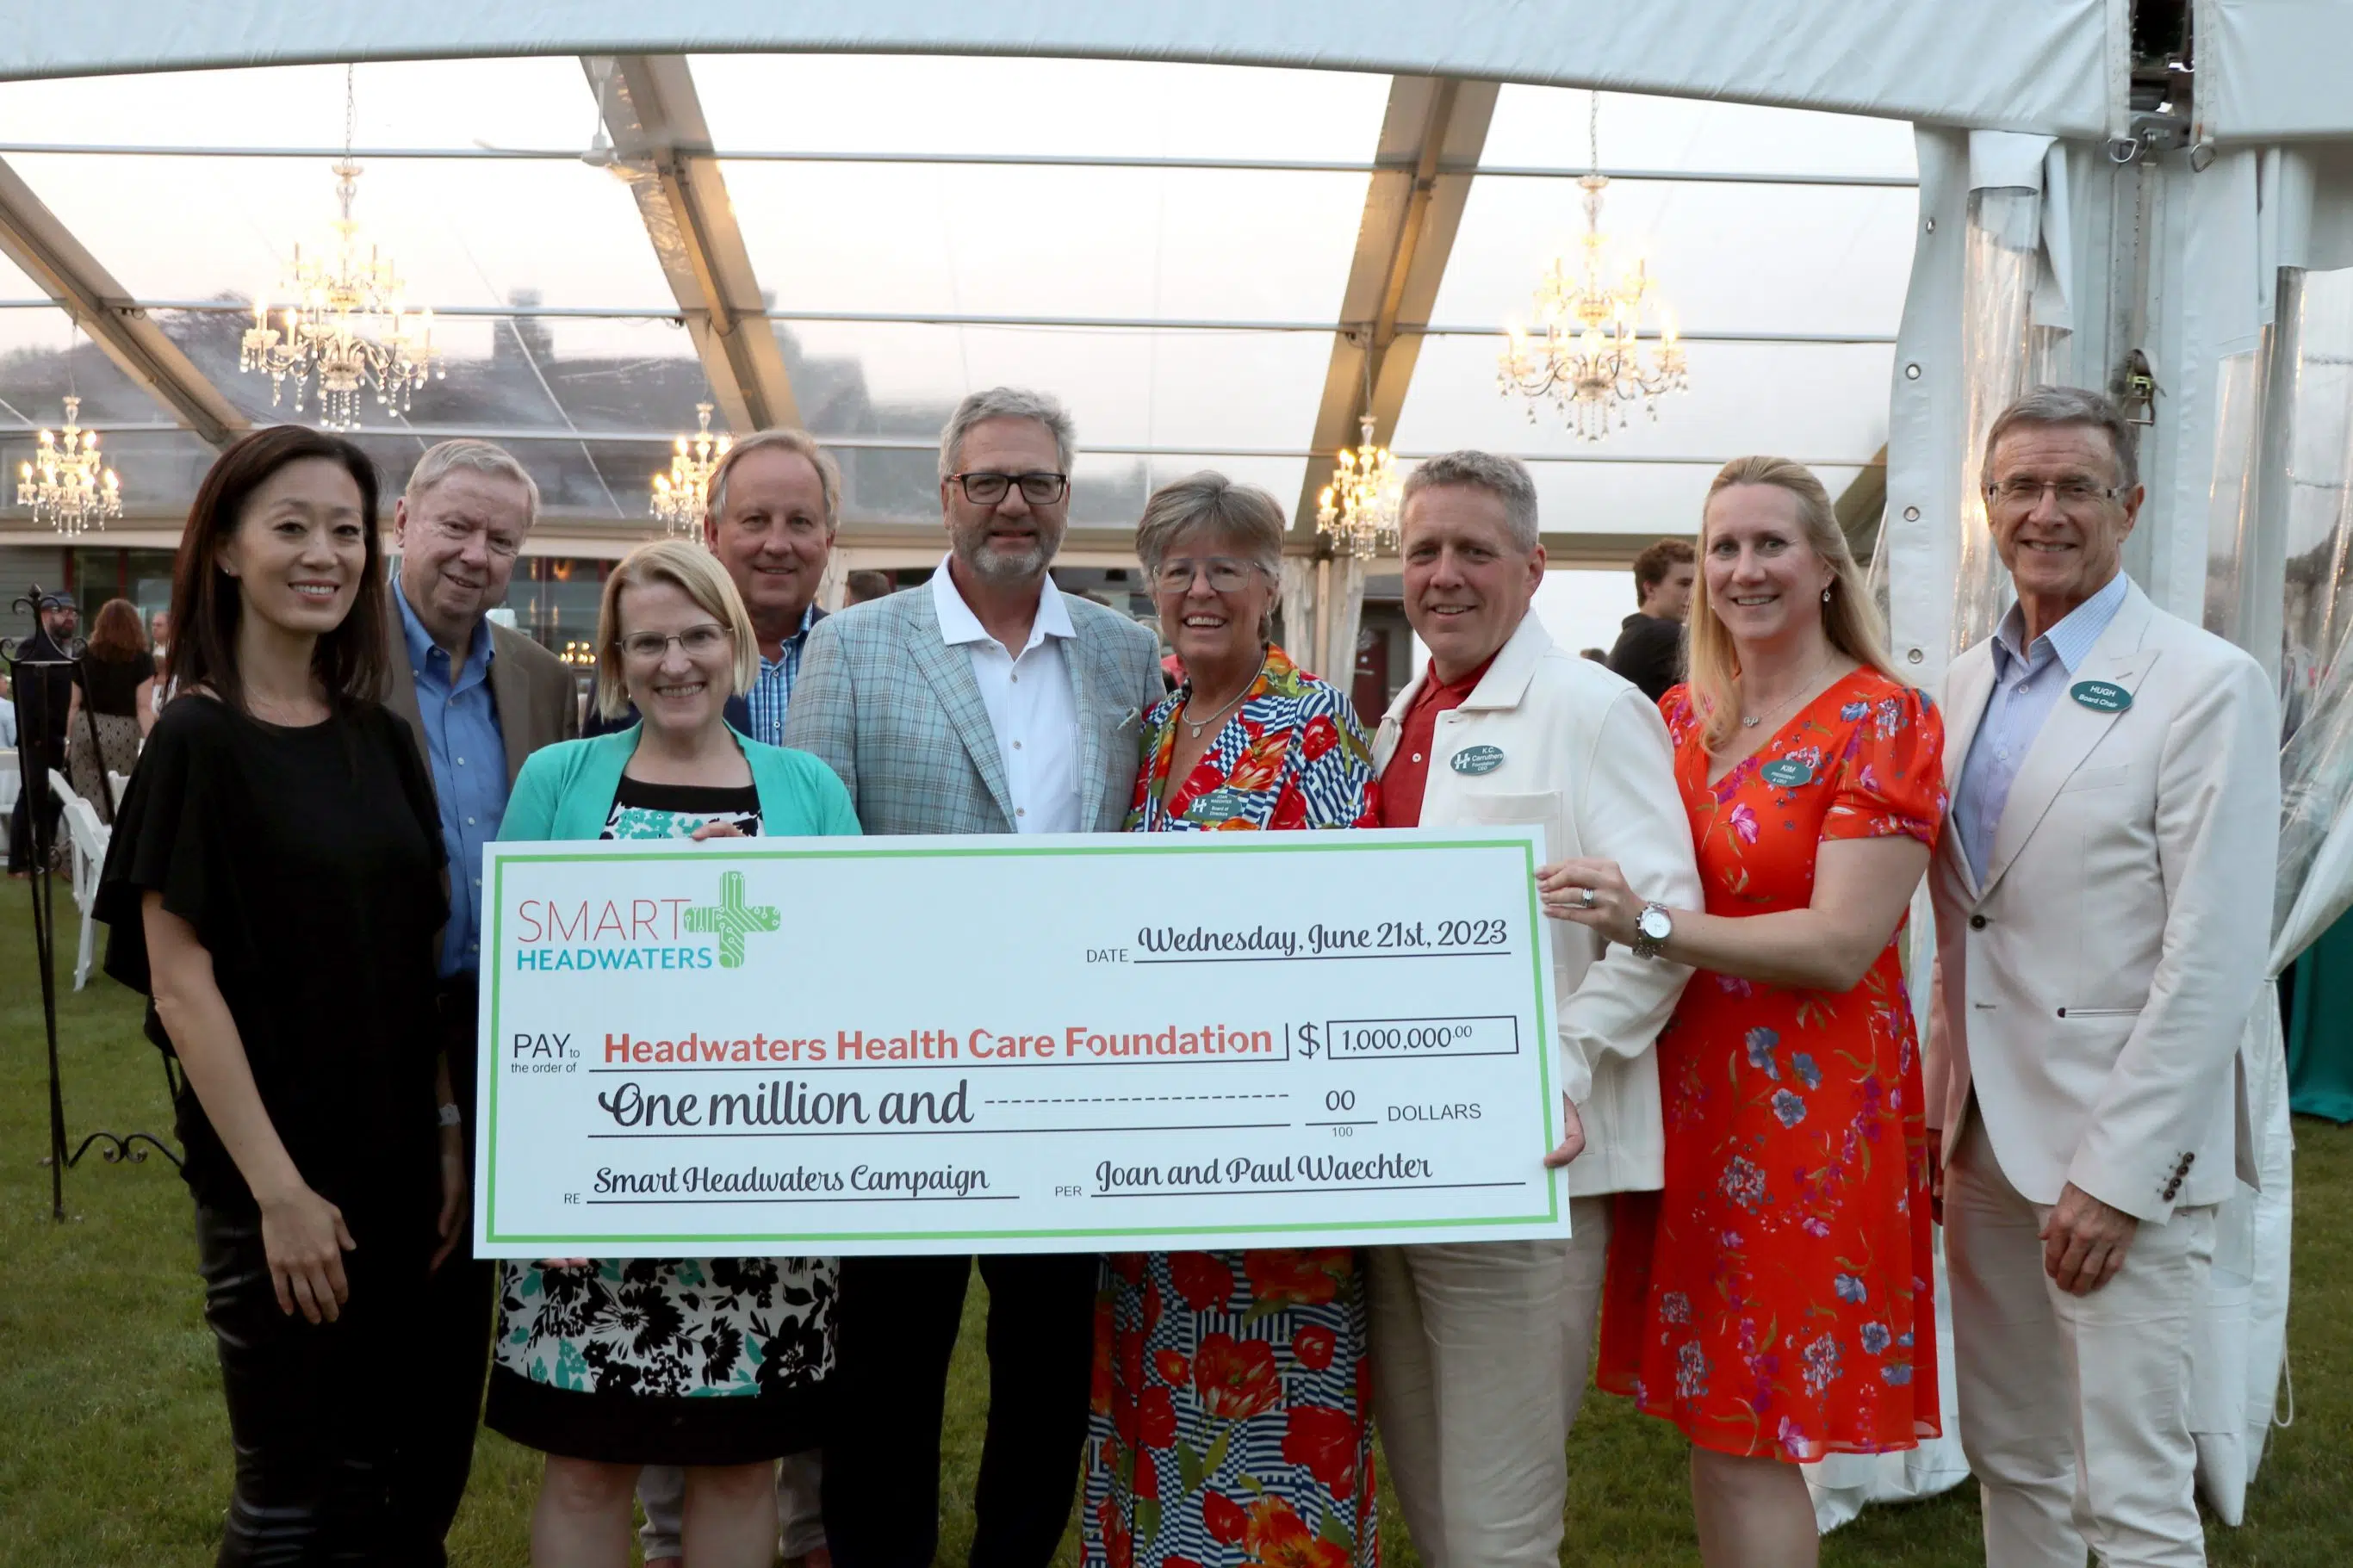 Headwaters Health Care Foundation Launches Smart Headwaters Campaign